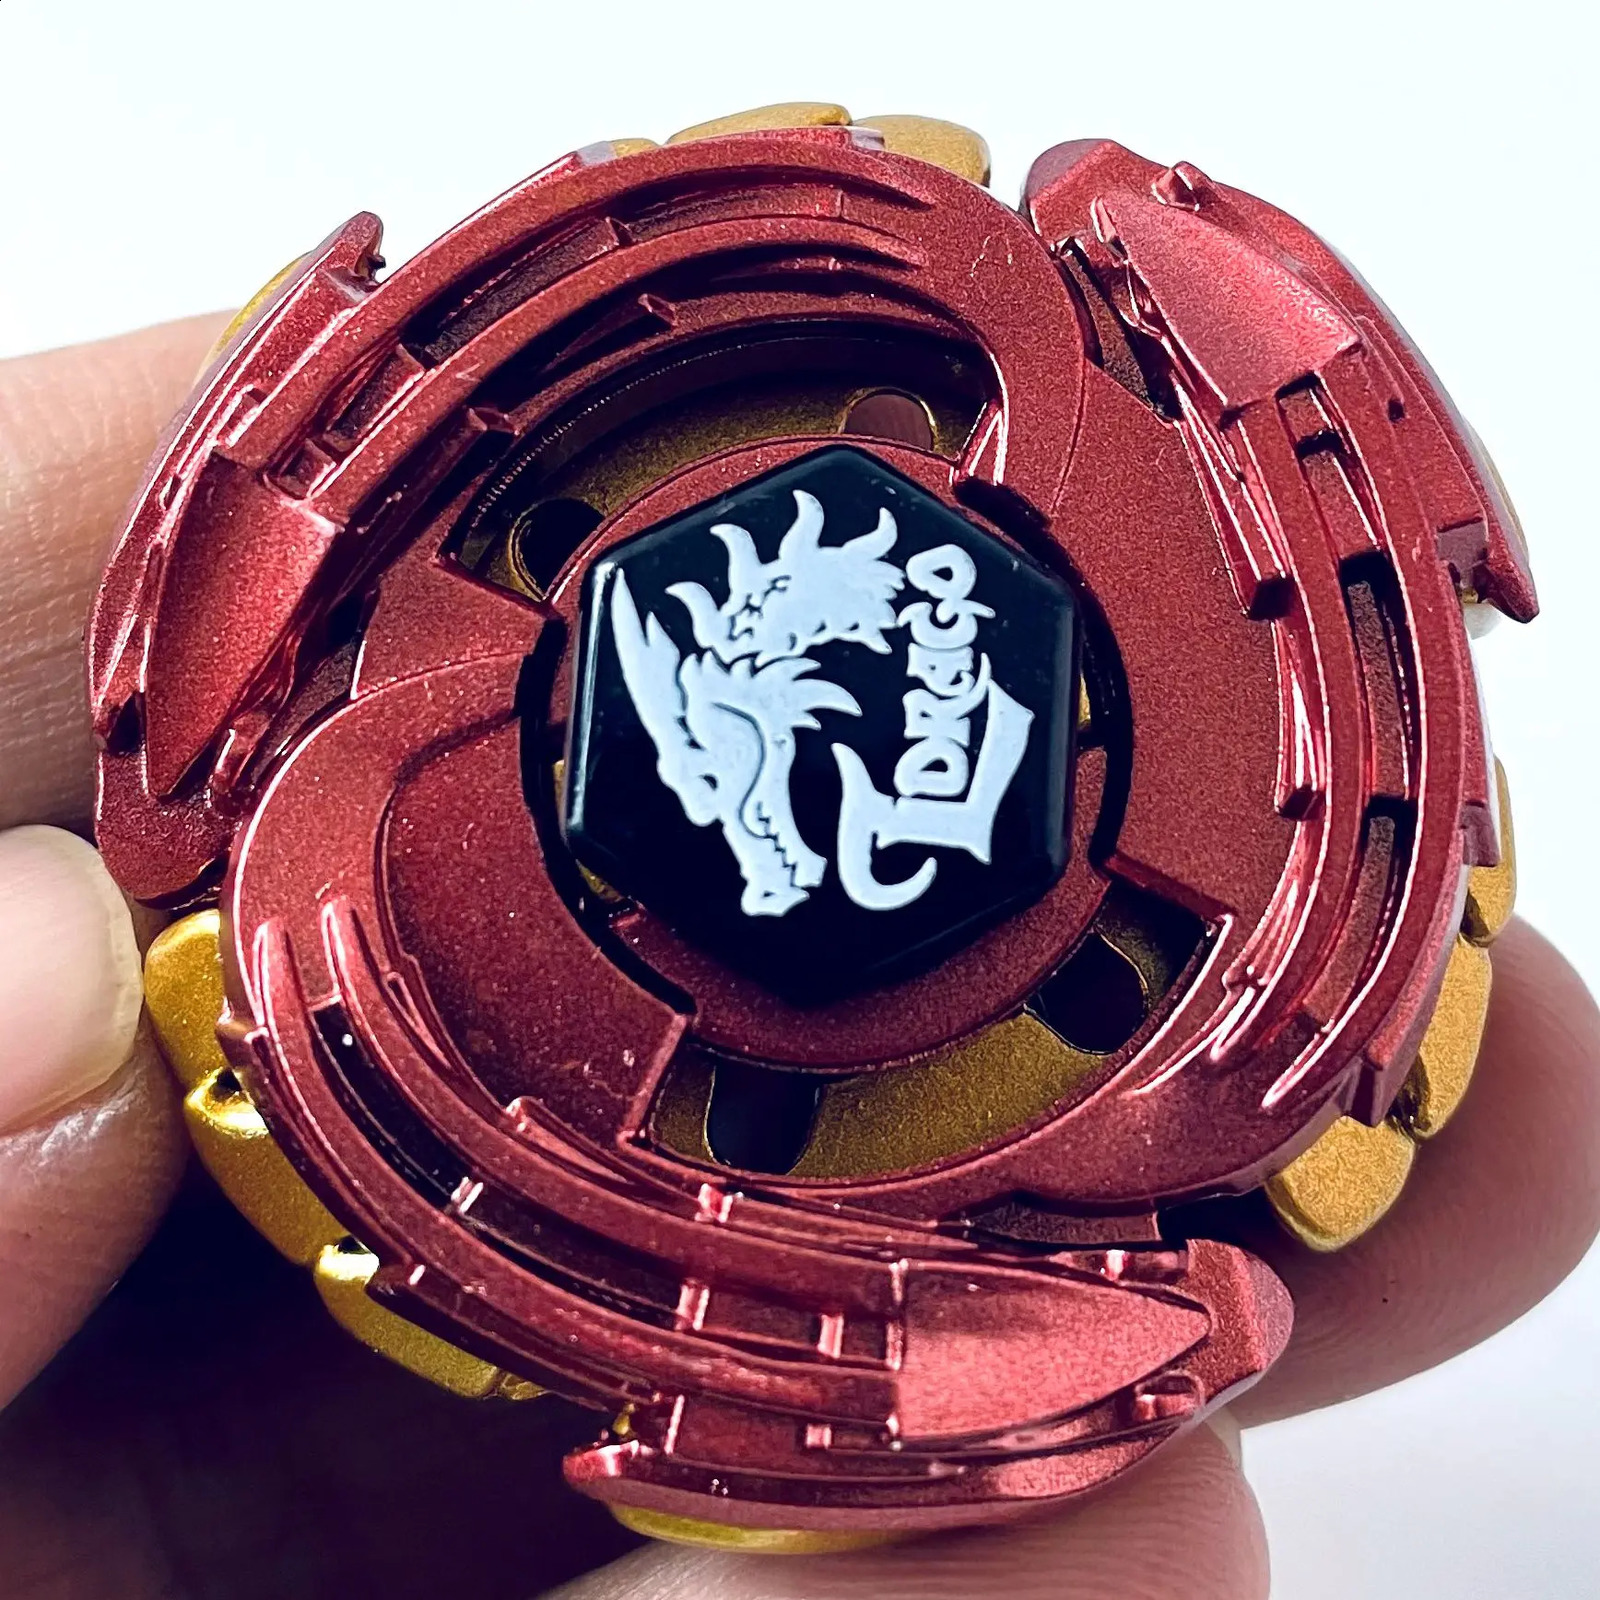 4D Tomy Beyblade Metal Fight Fusion Pegasus Collectible Anime Beys Toy 240127